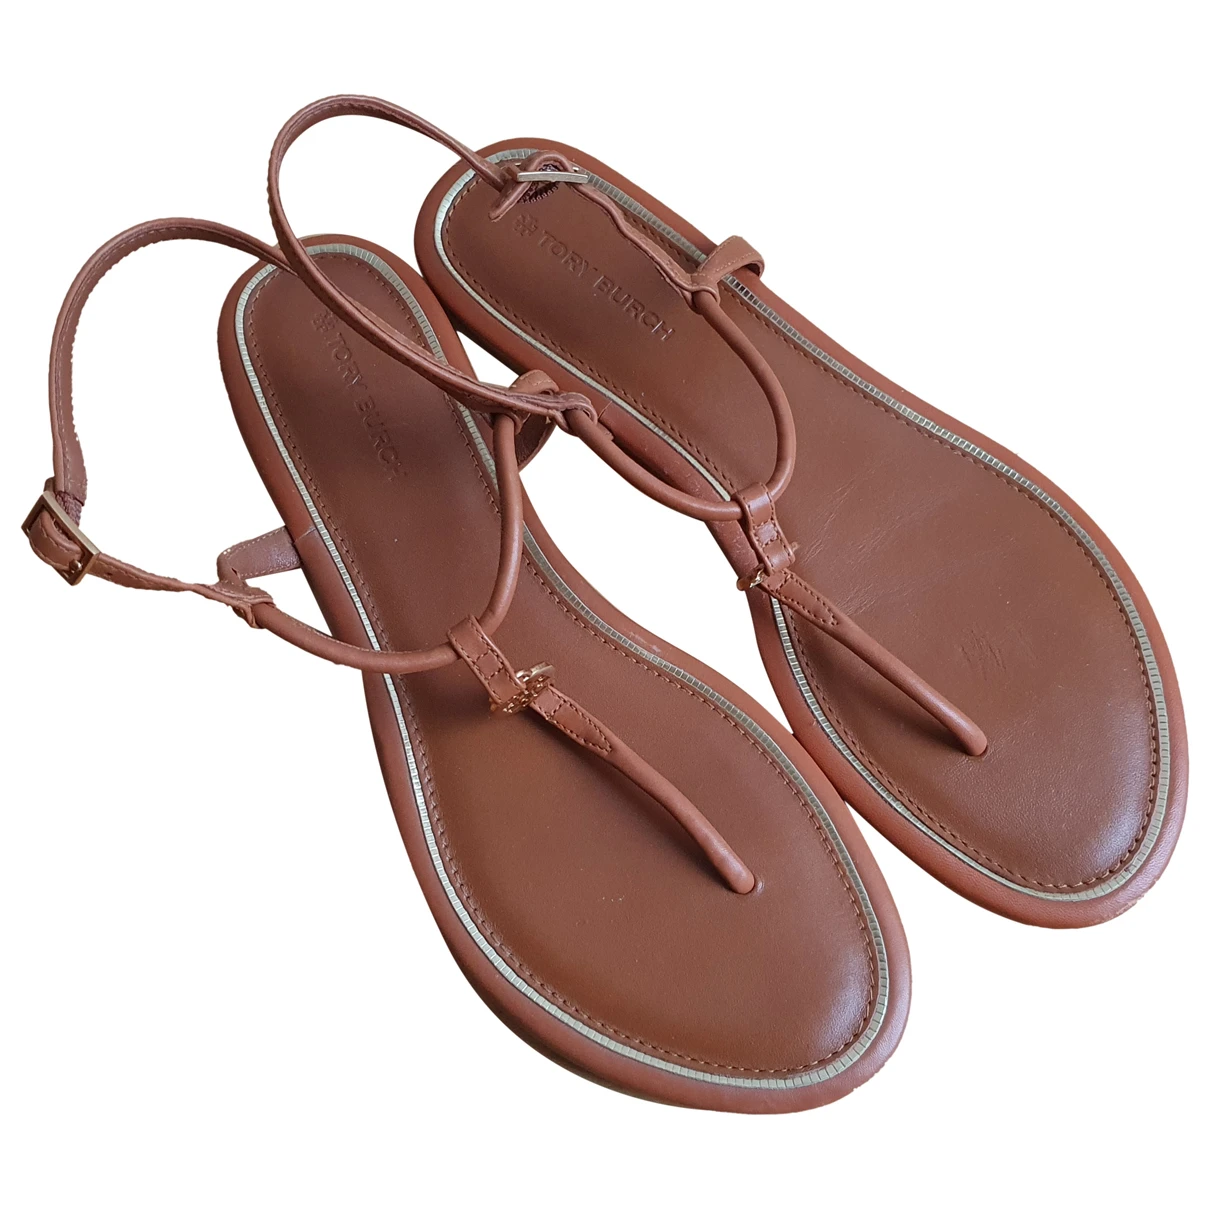 Pre-owned Tory Burch Leather Sandal In Camel